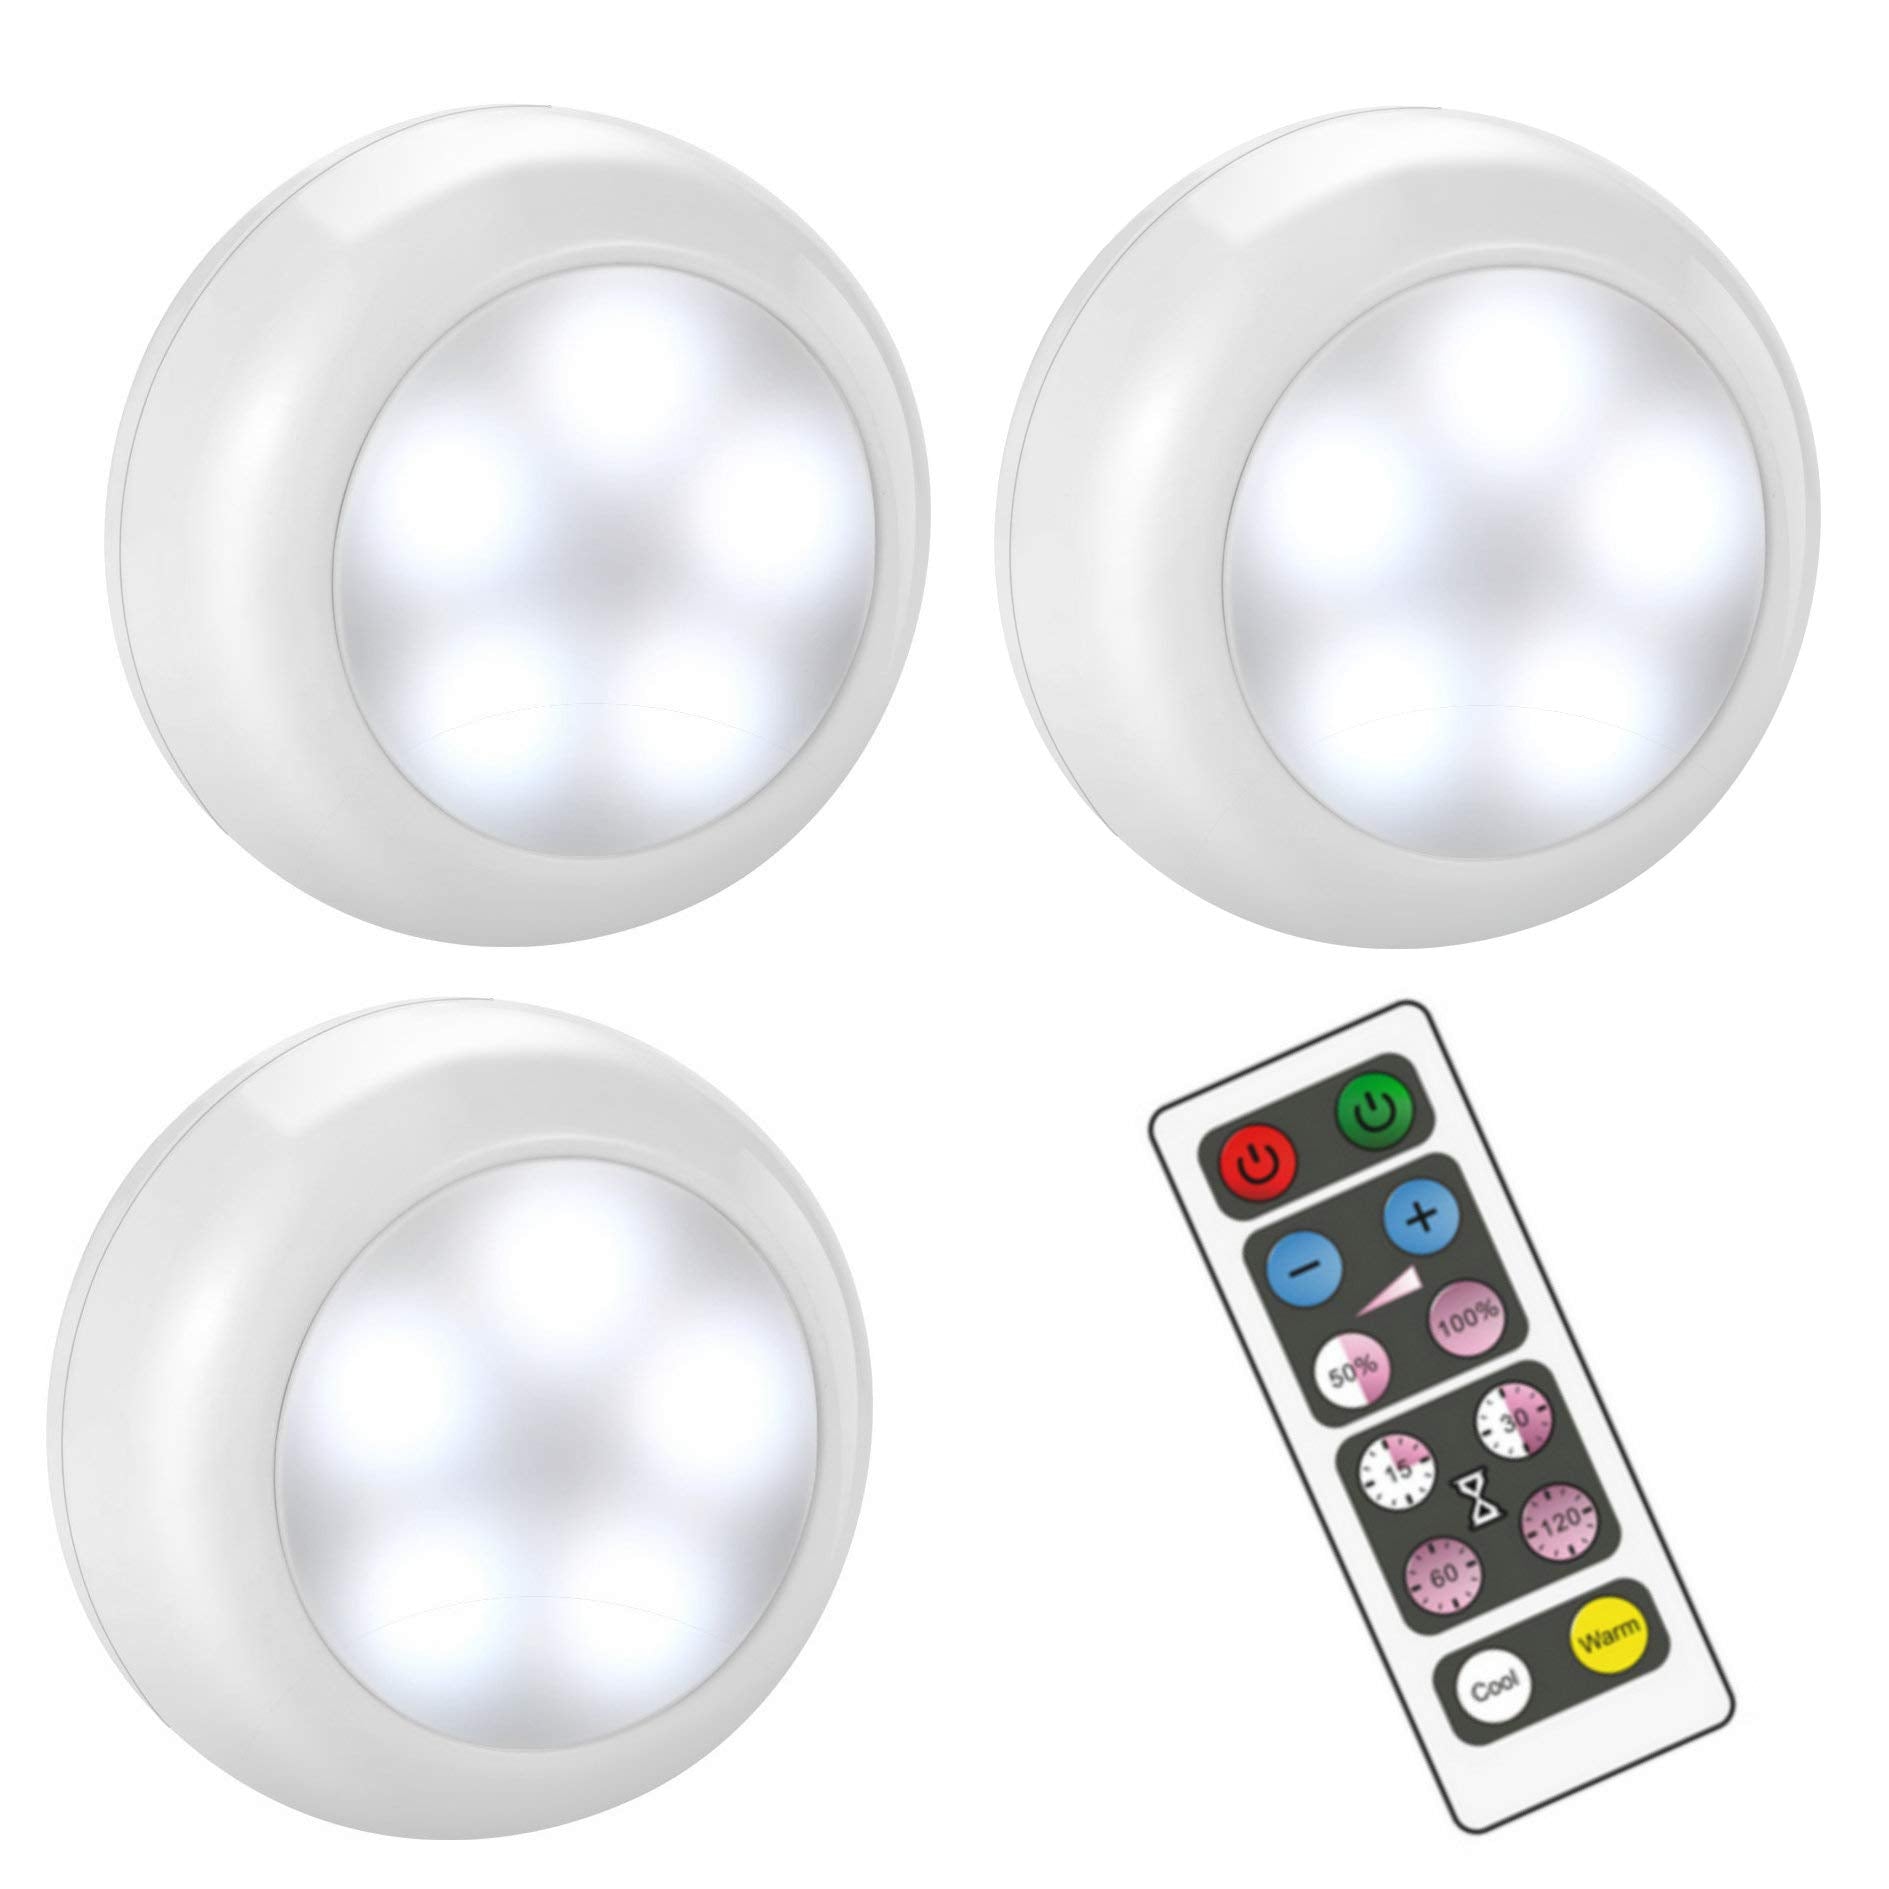 BLS AA-1035 Led Puck Lights with Remote Control, Wireless Dimmable Stick On Lights, 3 AA Battery Operated, Push Lights, Cupboards, Under Cabinet Lights with Timer, Cool White and Warm White - 3 Pack